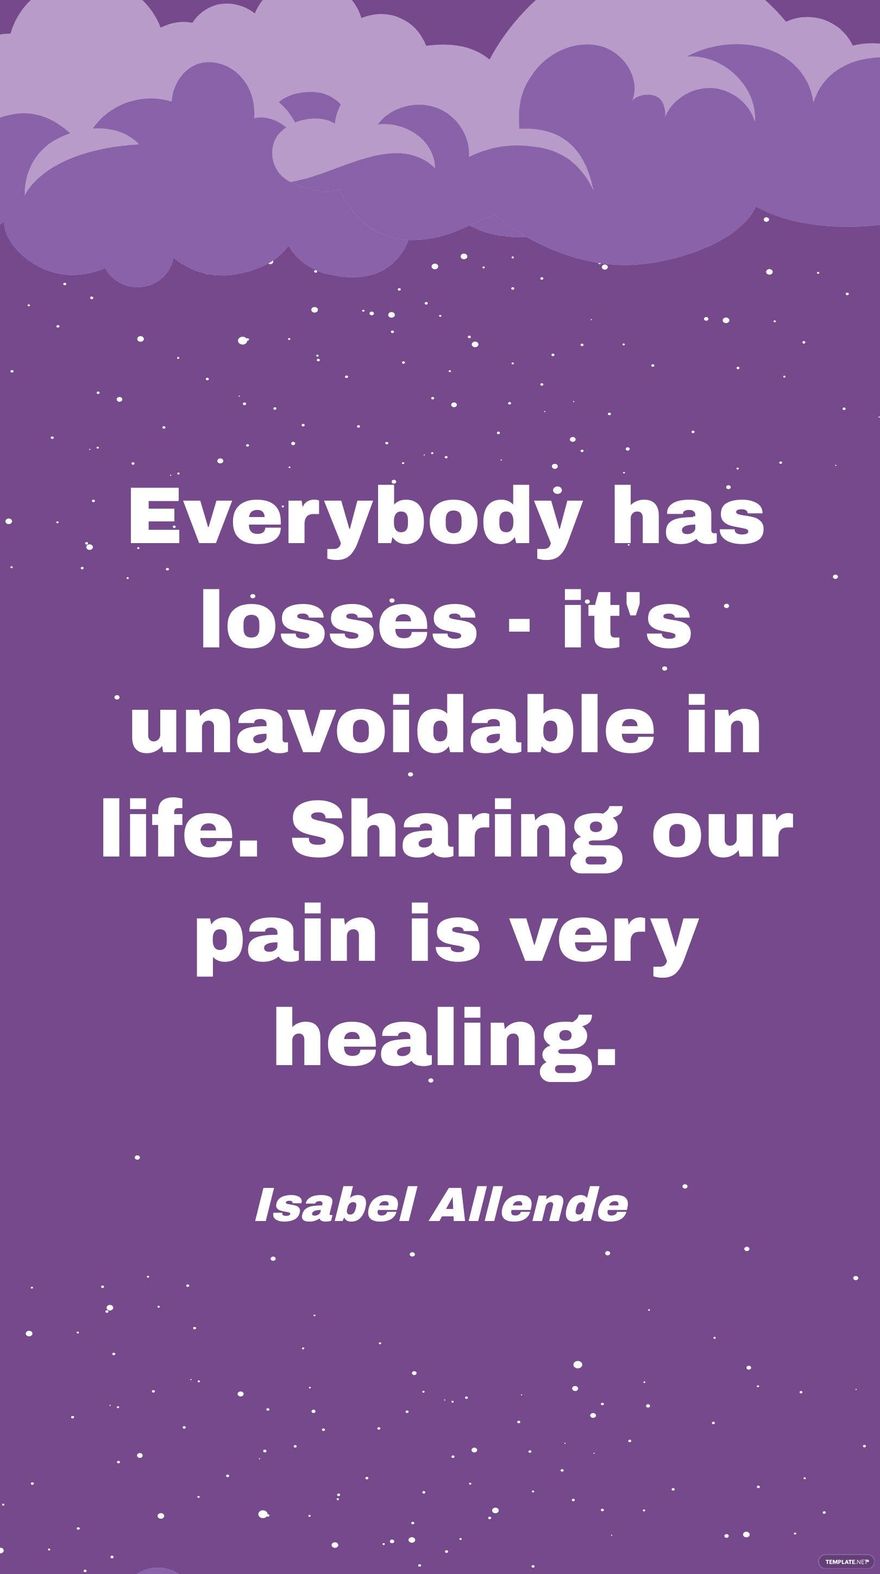 Free Isabel Allende - Everybody has losses - it's unavoidable in life. Sharing our pain is very healing.